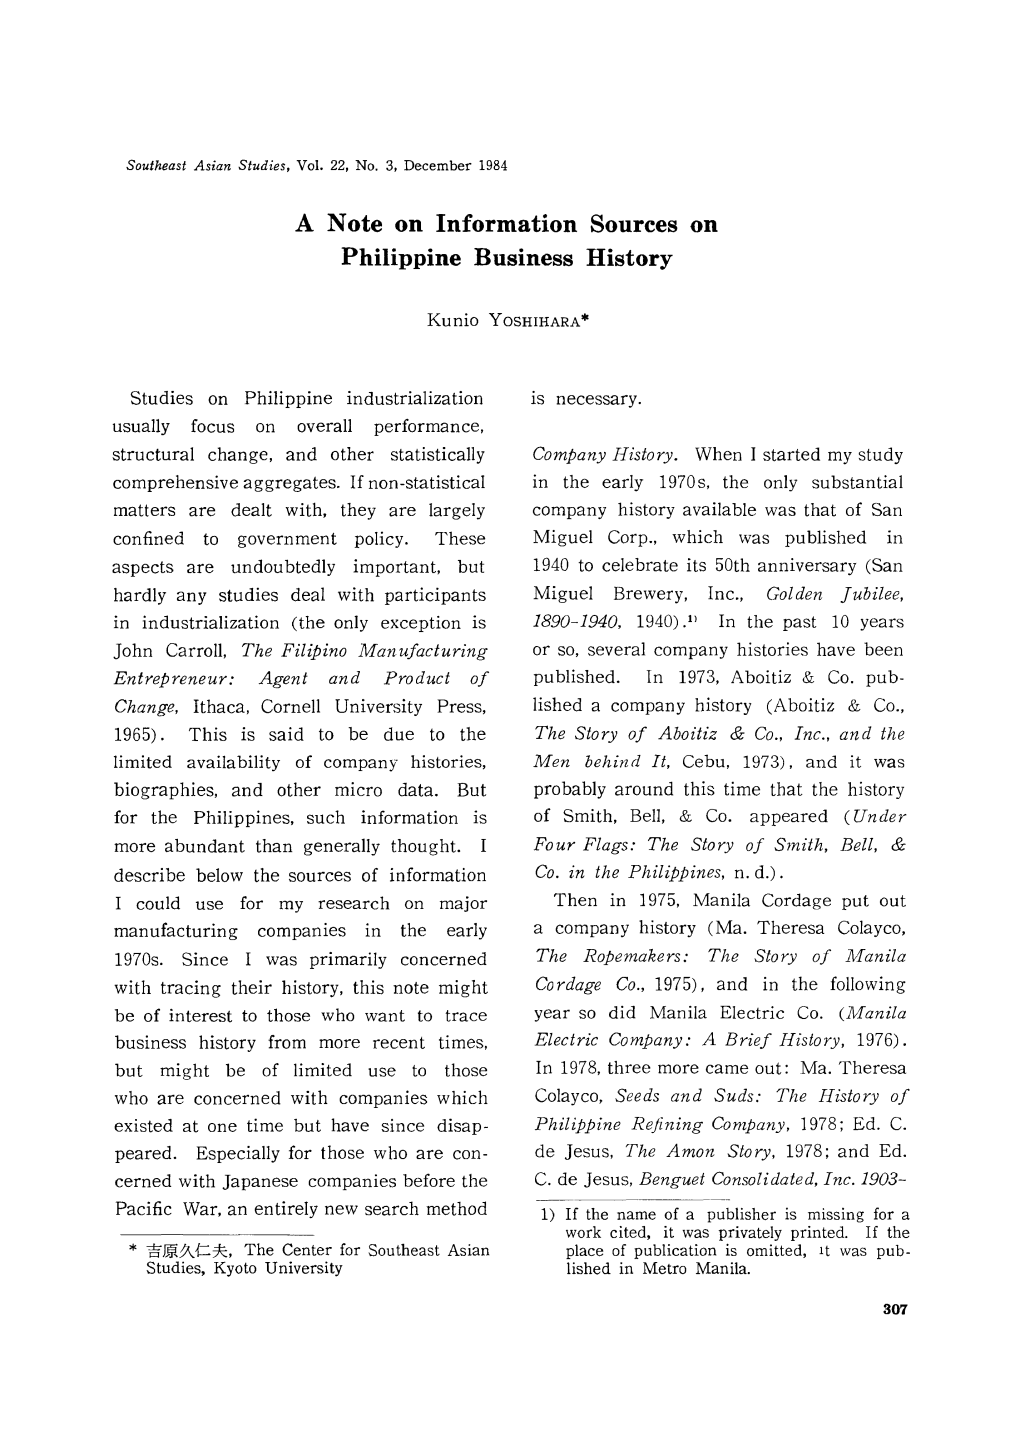 A Note on Information Sources on Philippine Business History